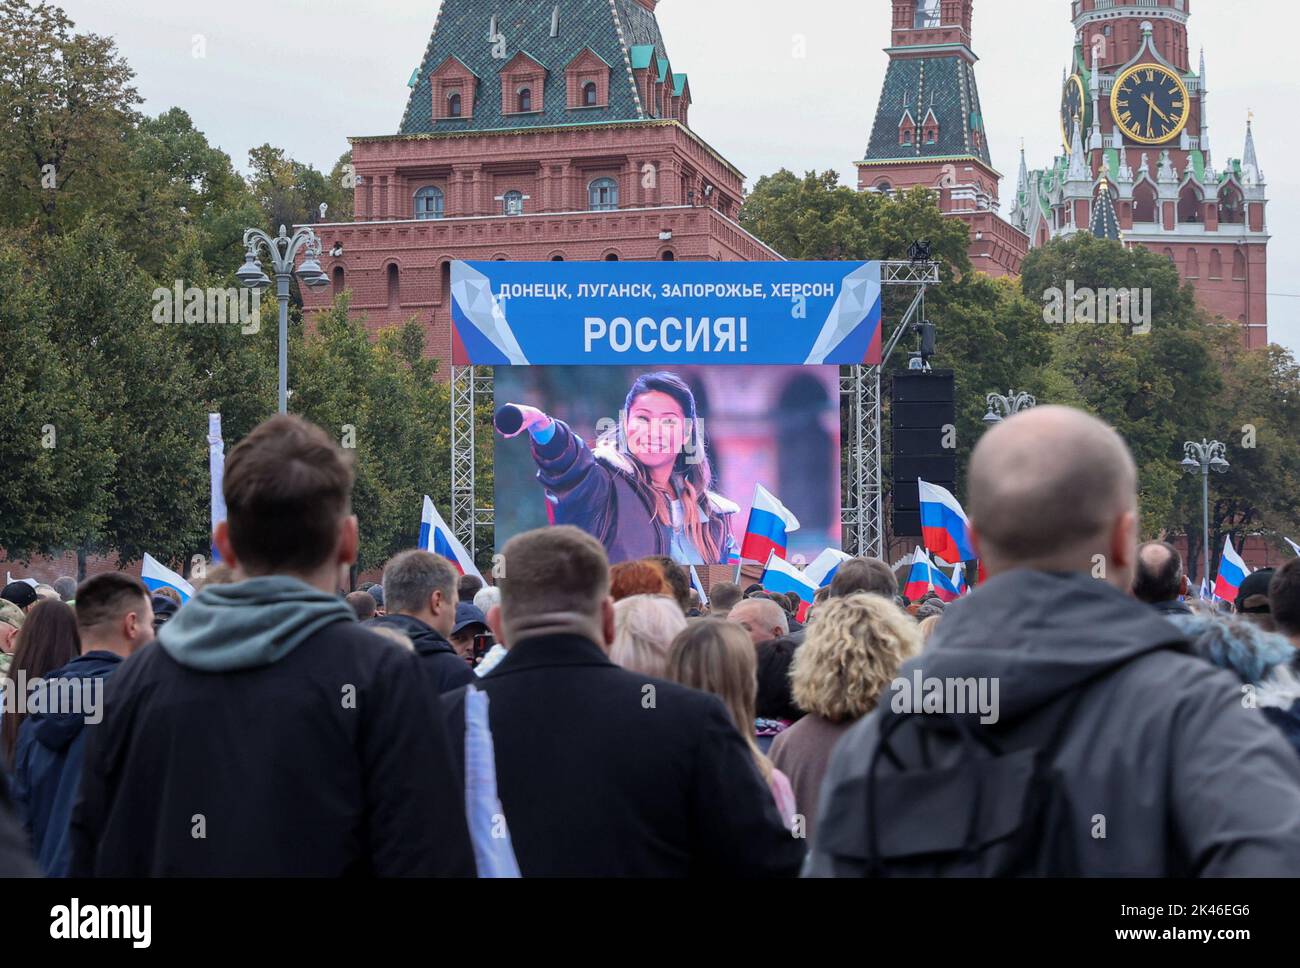 People attend a concert marking the declared annexation of the Russian-controlled territories of four Ukraine's Donetsk, Luhansk, Kherson and Zaporizhzhia regions, after holding what Russian authorities called referendums in the occupied areas of Ukraine that were condemned by Kyiv and governments worldwide, near the Kremlin Wall in central Moscow, Russia, September 30, 2022. A slogan on the screen reads: 'Donetsk, Luhansk, Zaporizhzhia, Kherson - Russia!'  REUTERS/REUTERS PHOTOGRAPHER Stock Photo